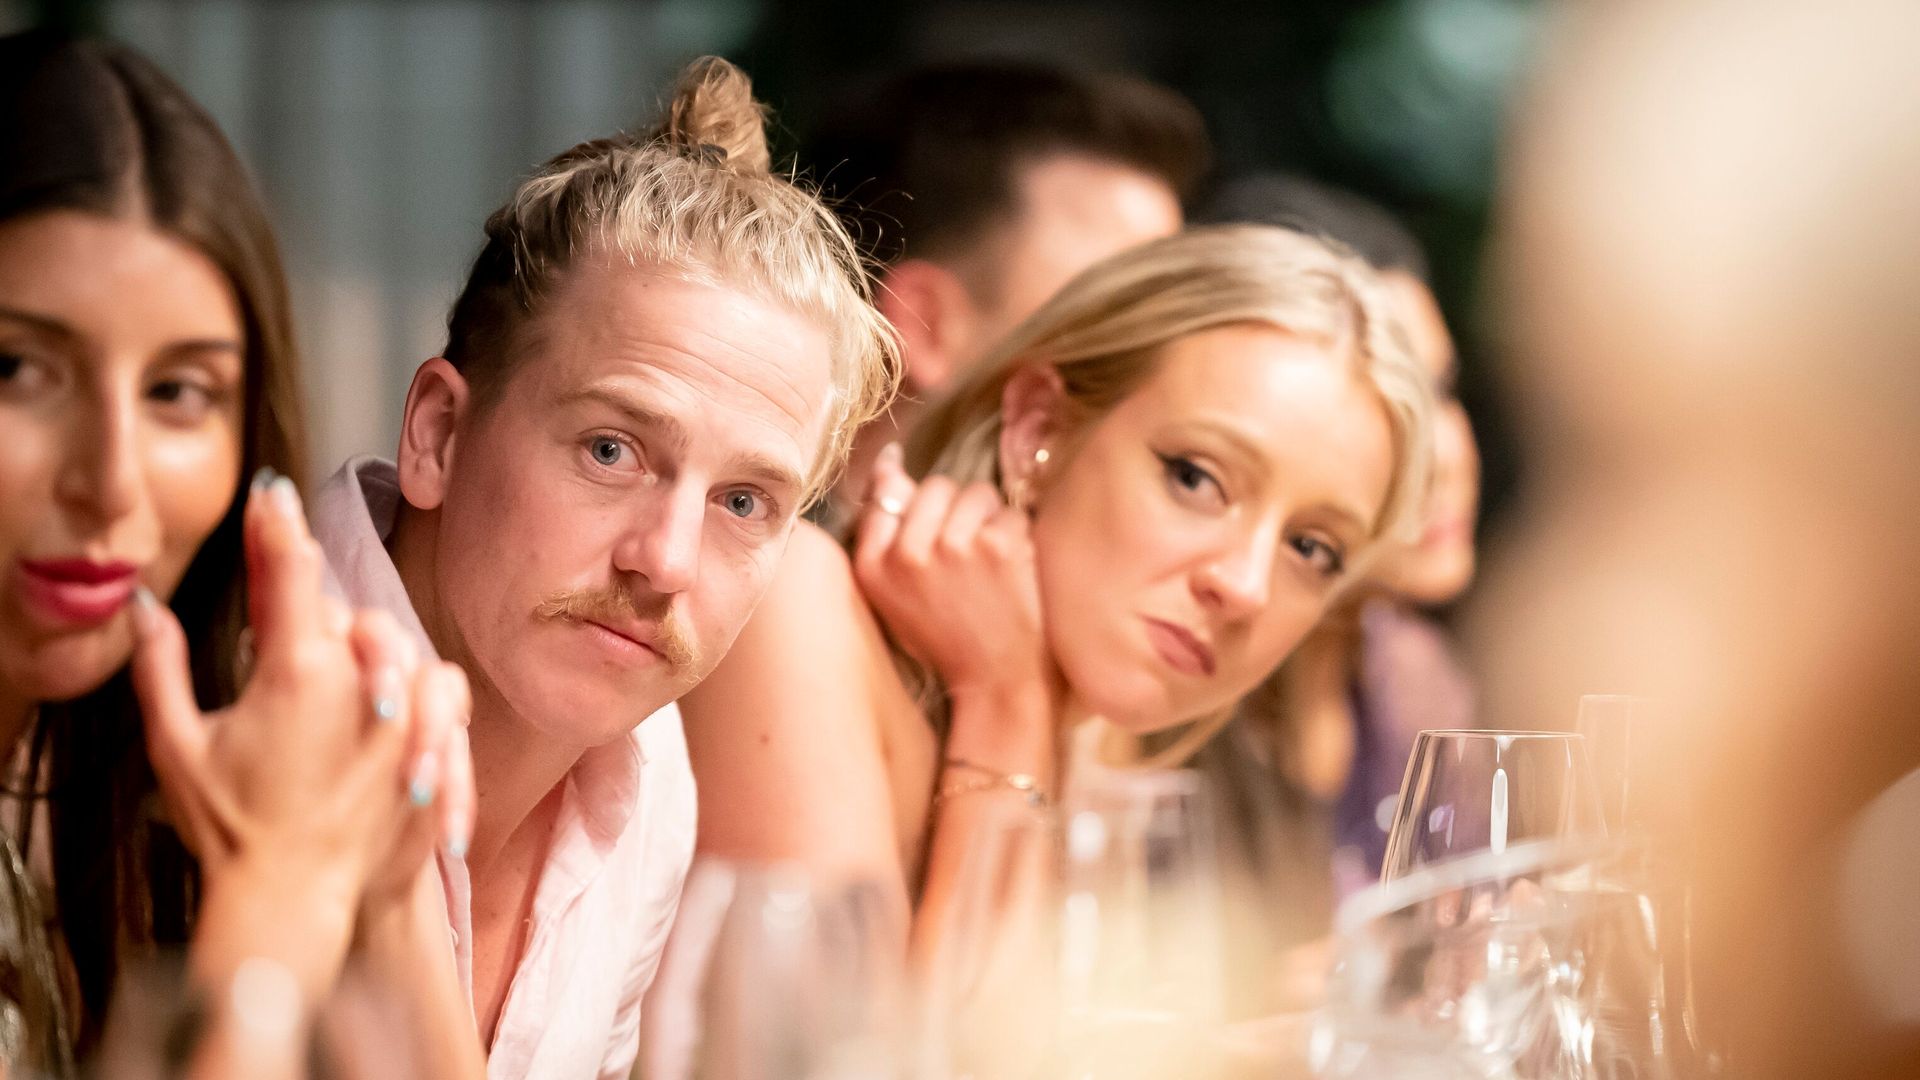 Cameron and Lyndall at dinner in MAFS